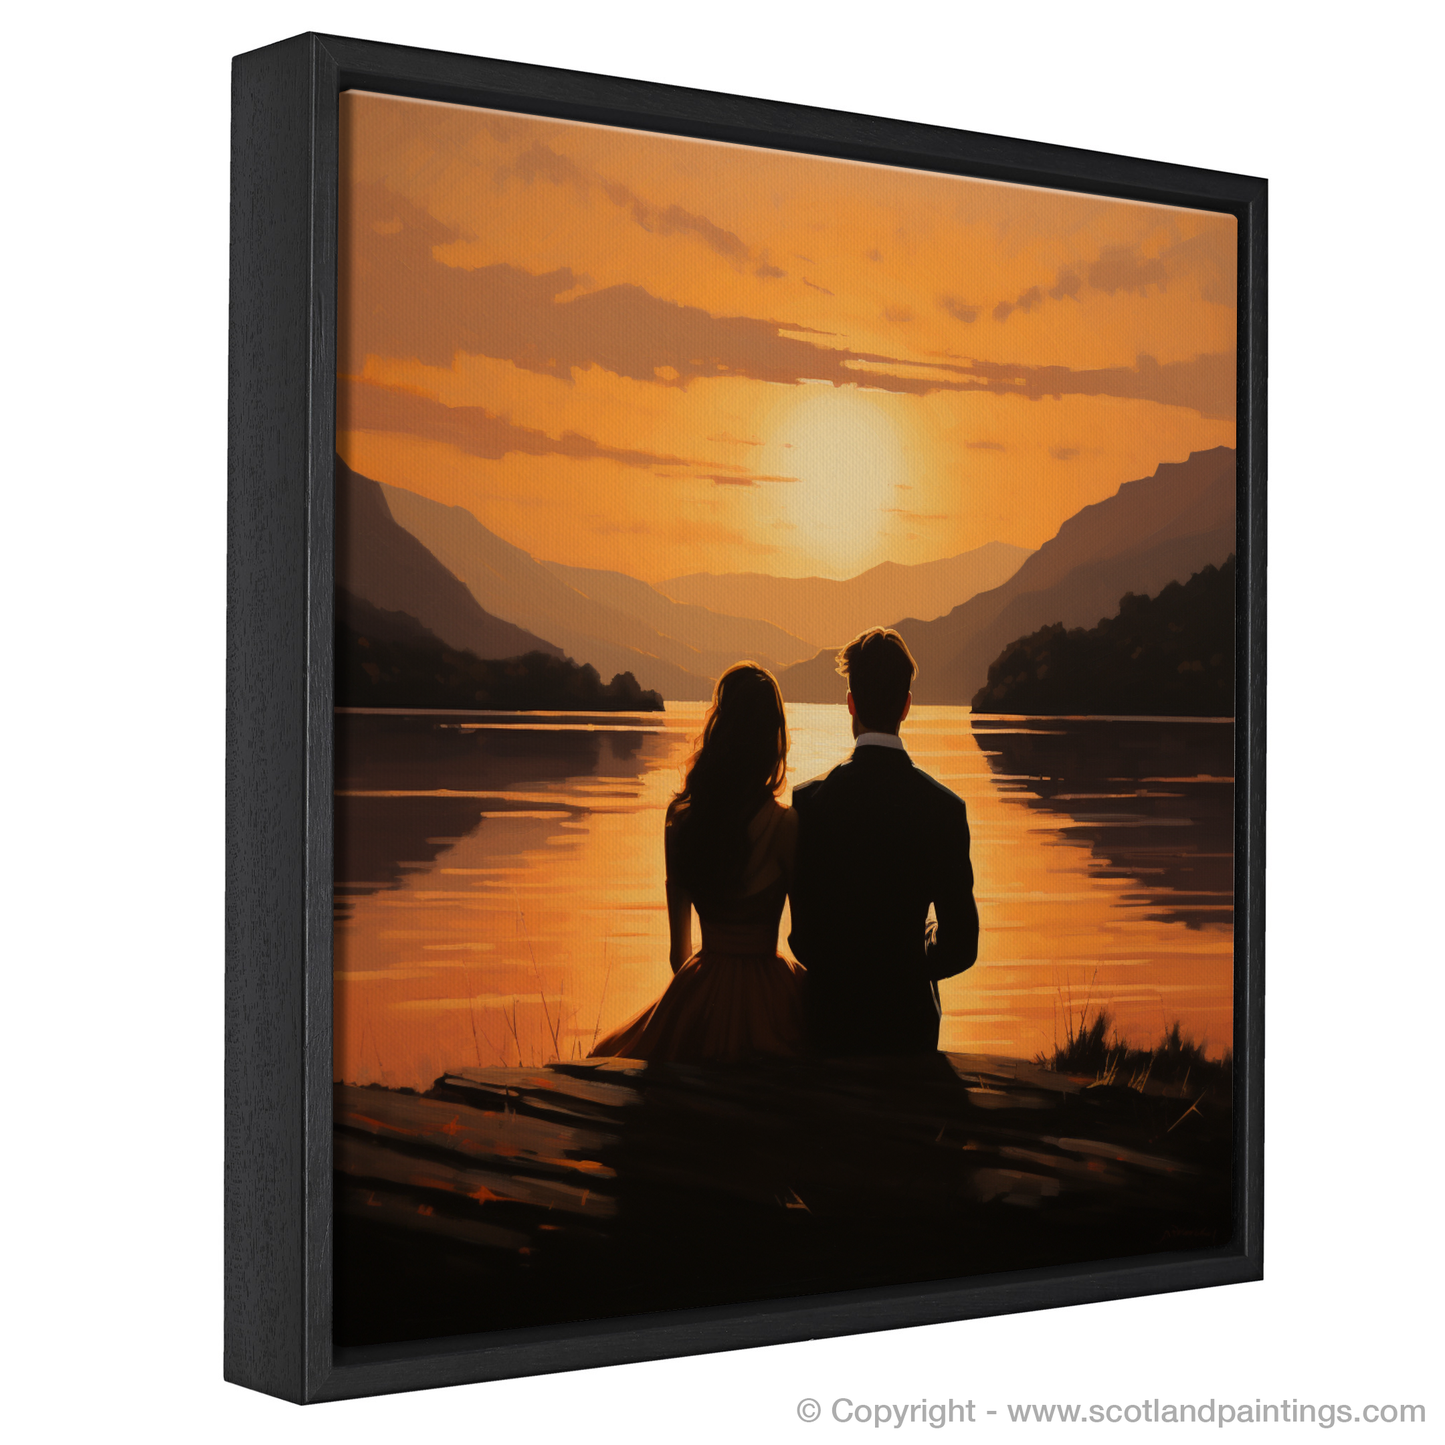 Painting and Art Print of Sunset over Loch Lomond entitled "Sunset Serenade over Loch Lomond".